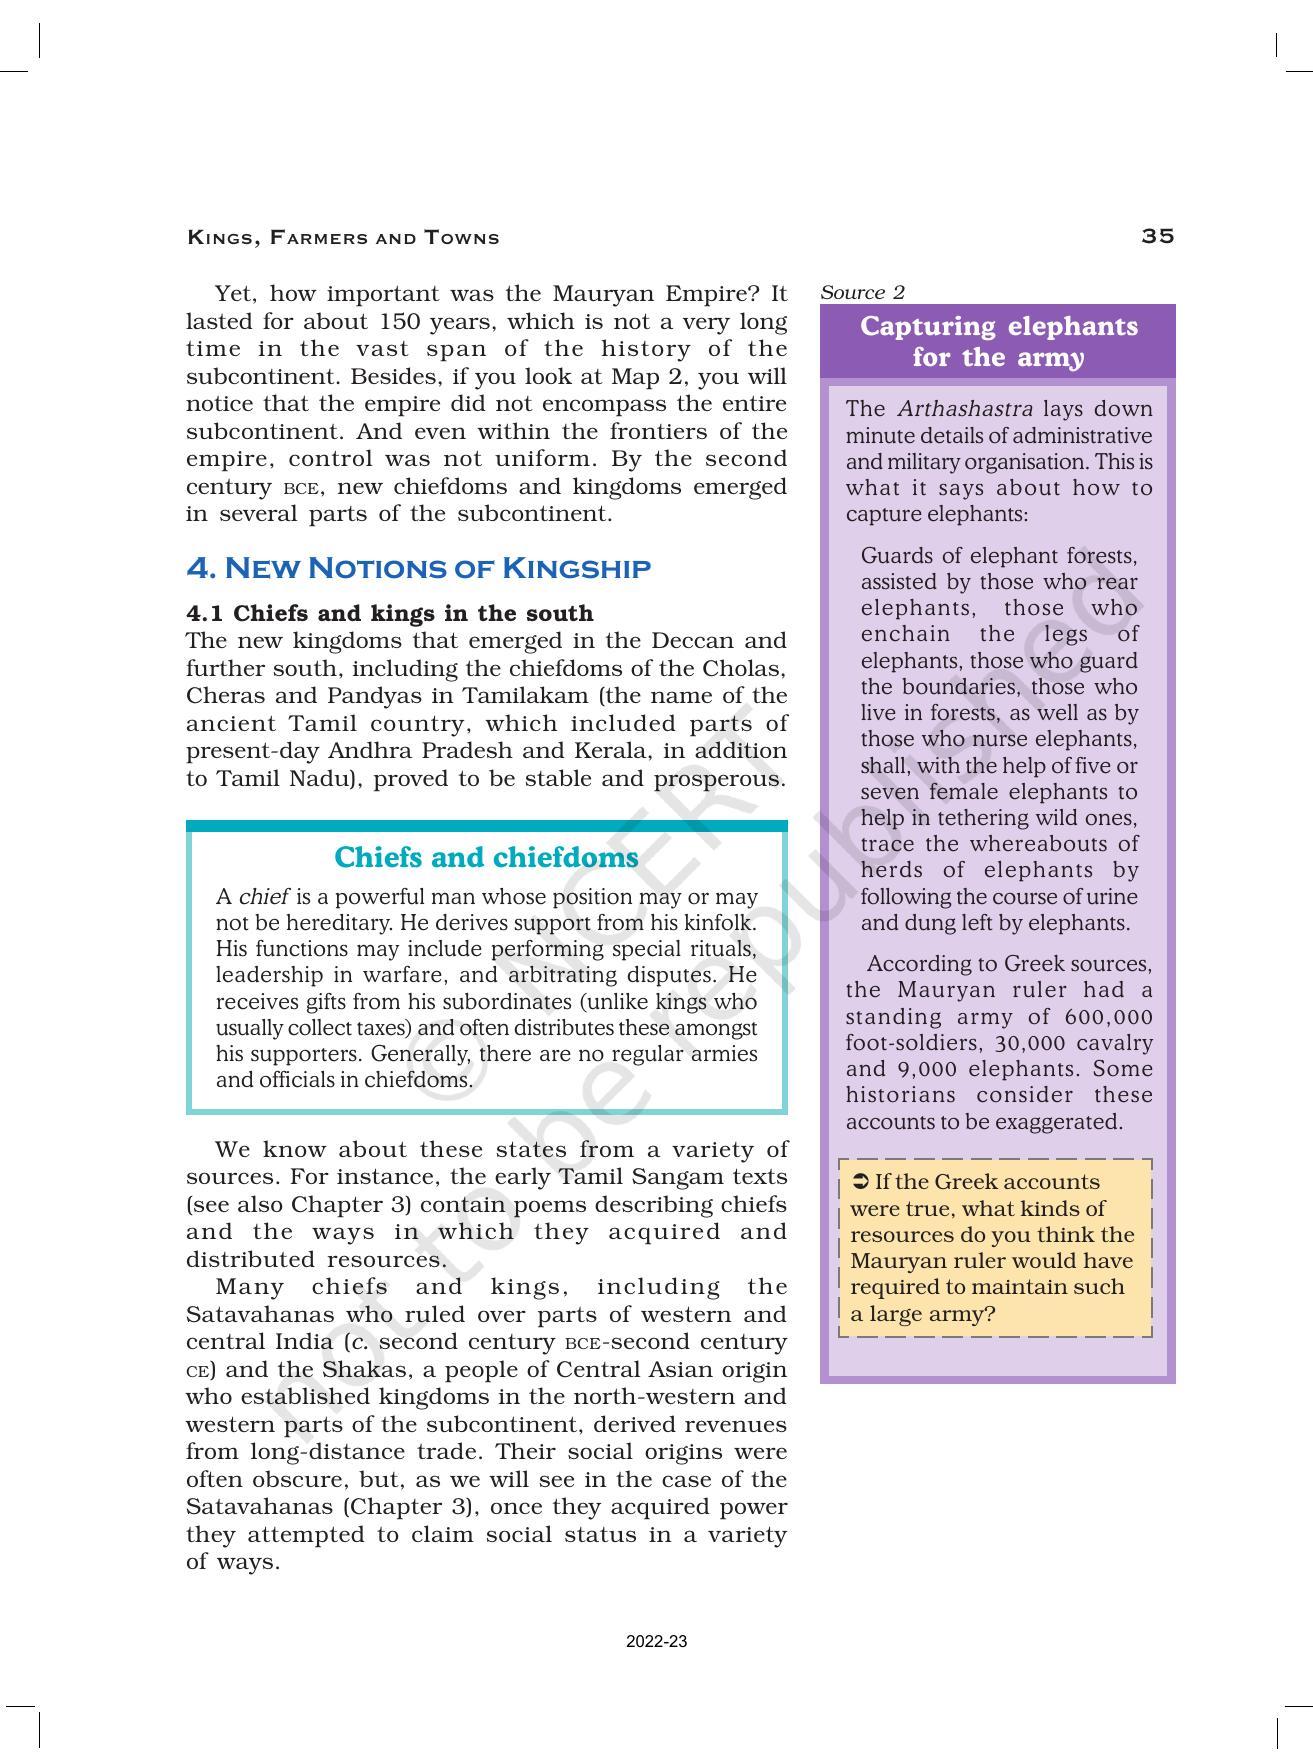 NCERT Book for Class 12 History (Part-1) Chapter 2 Kings, Farmers, and Towns - Page 8